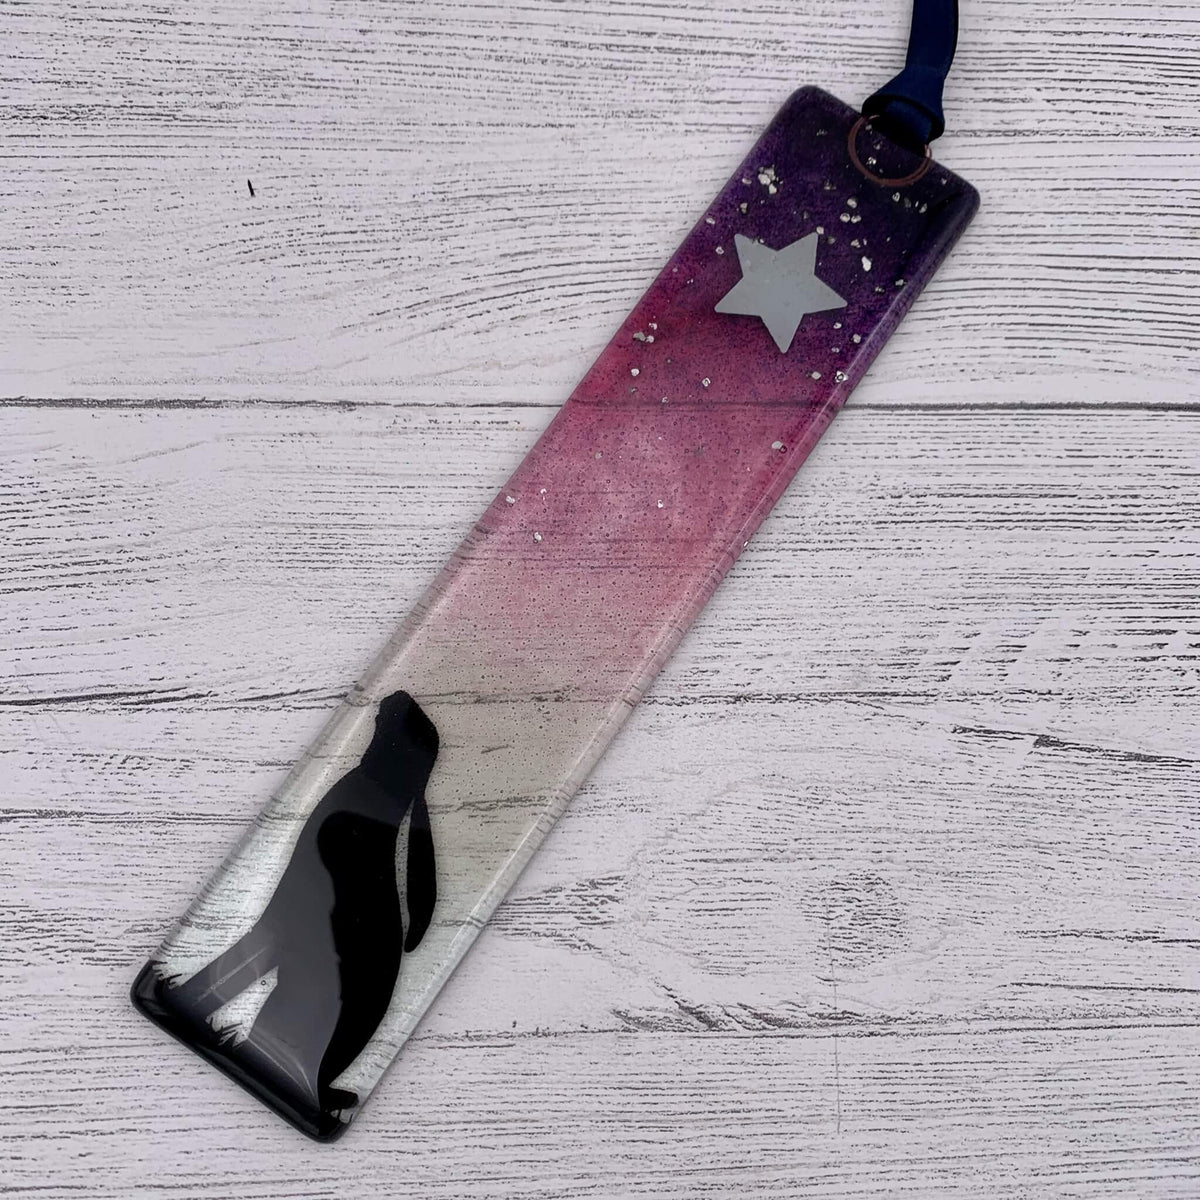 Handcrafted pink fused glass wish stick, with a star at the top and glitter.  